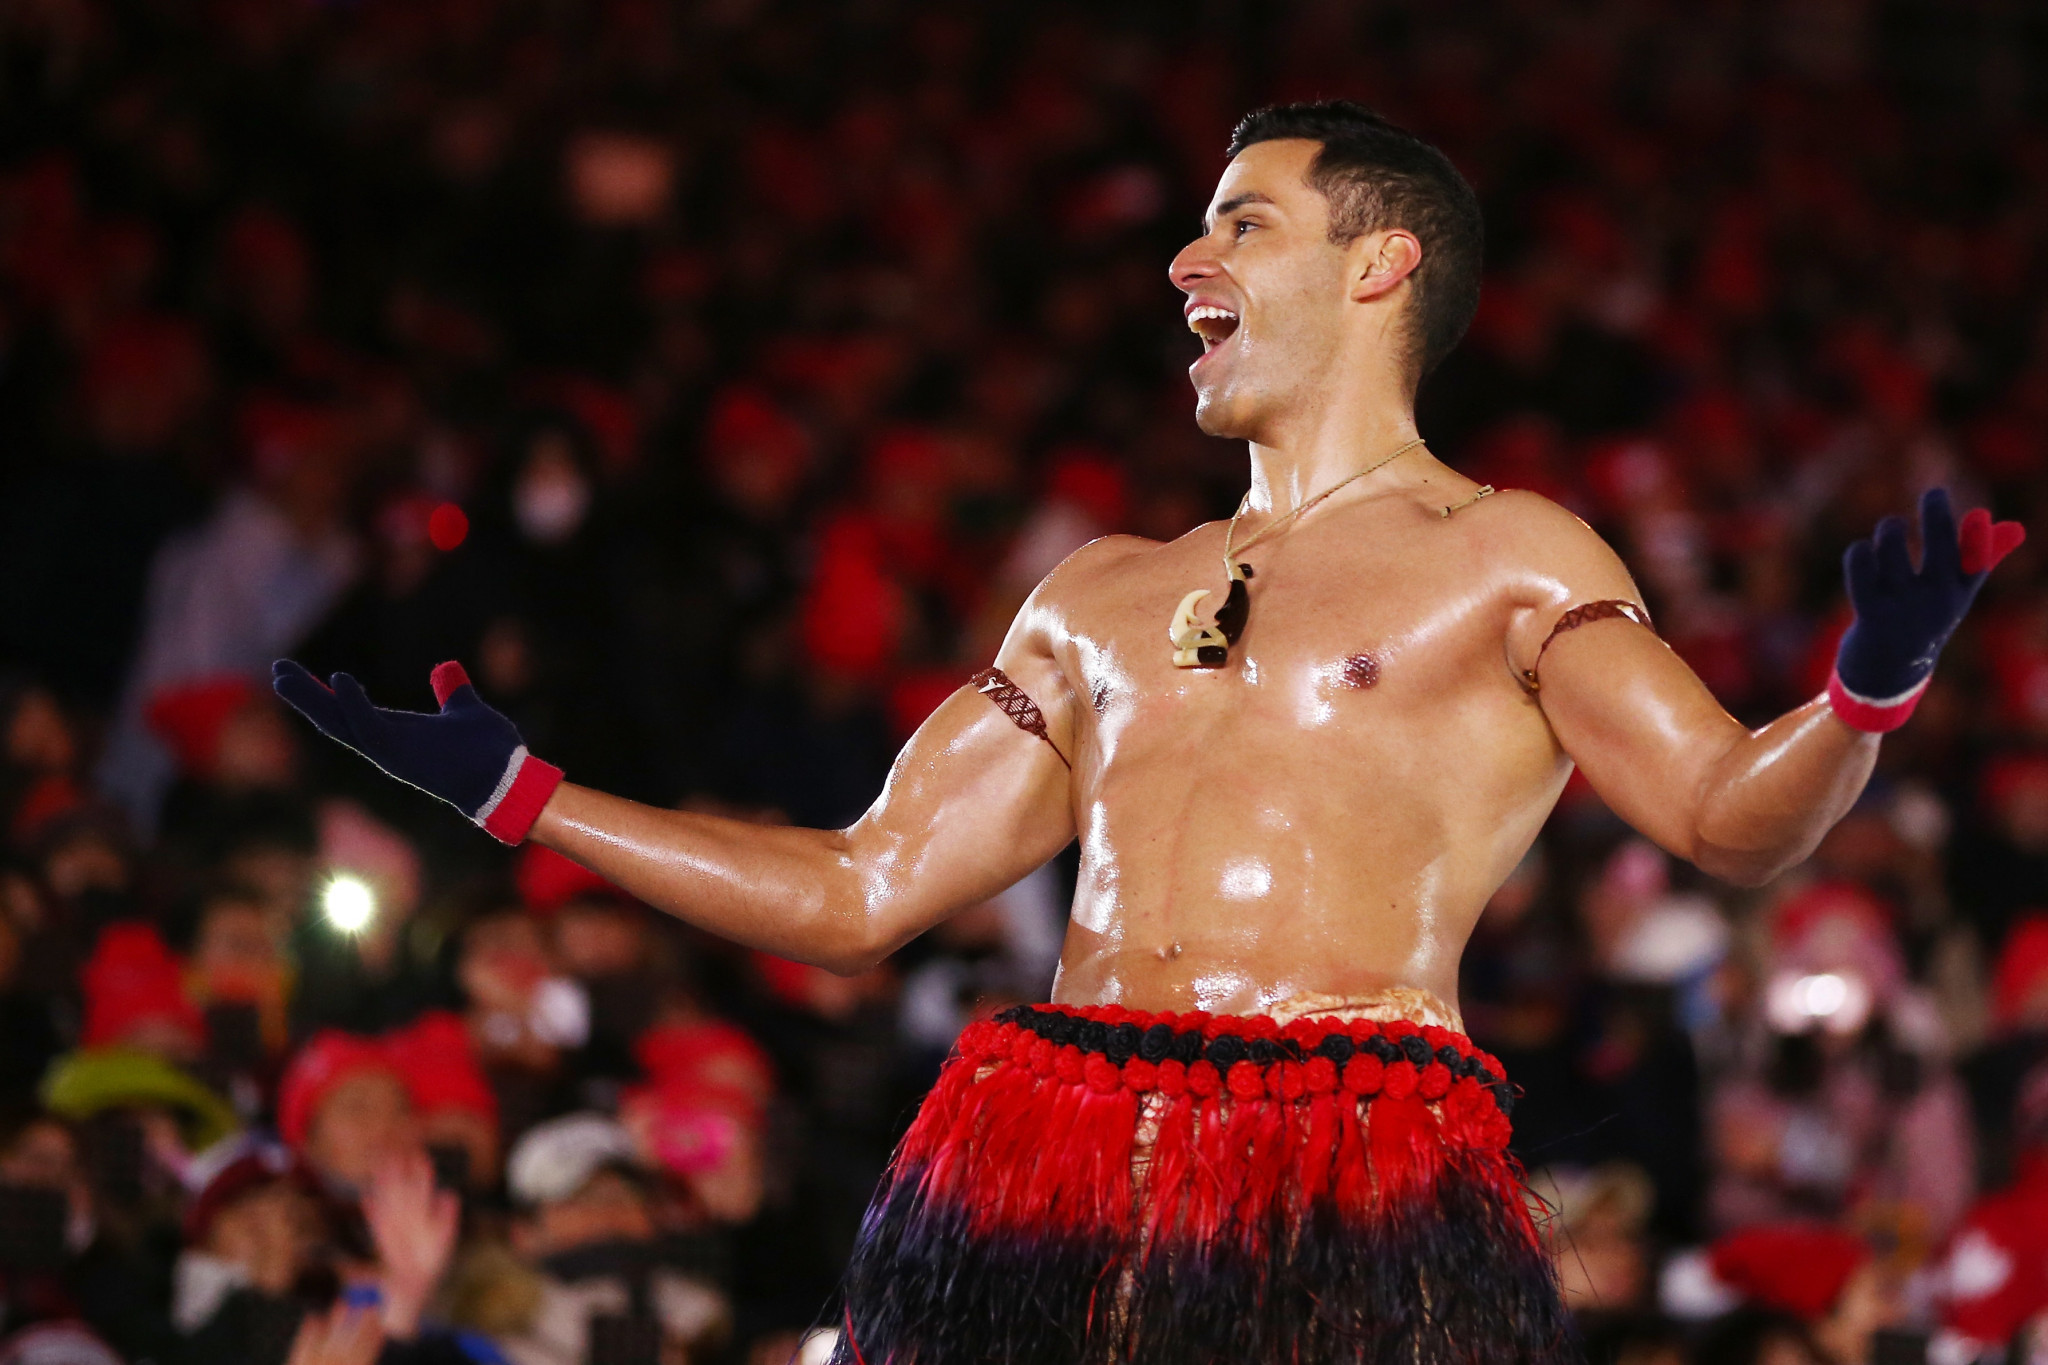 Tonga's Taufatofua aiming to participate in third Olympic sport at Tokyo 2020